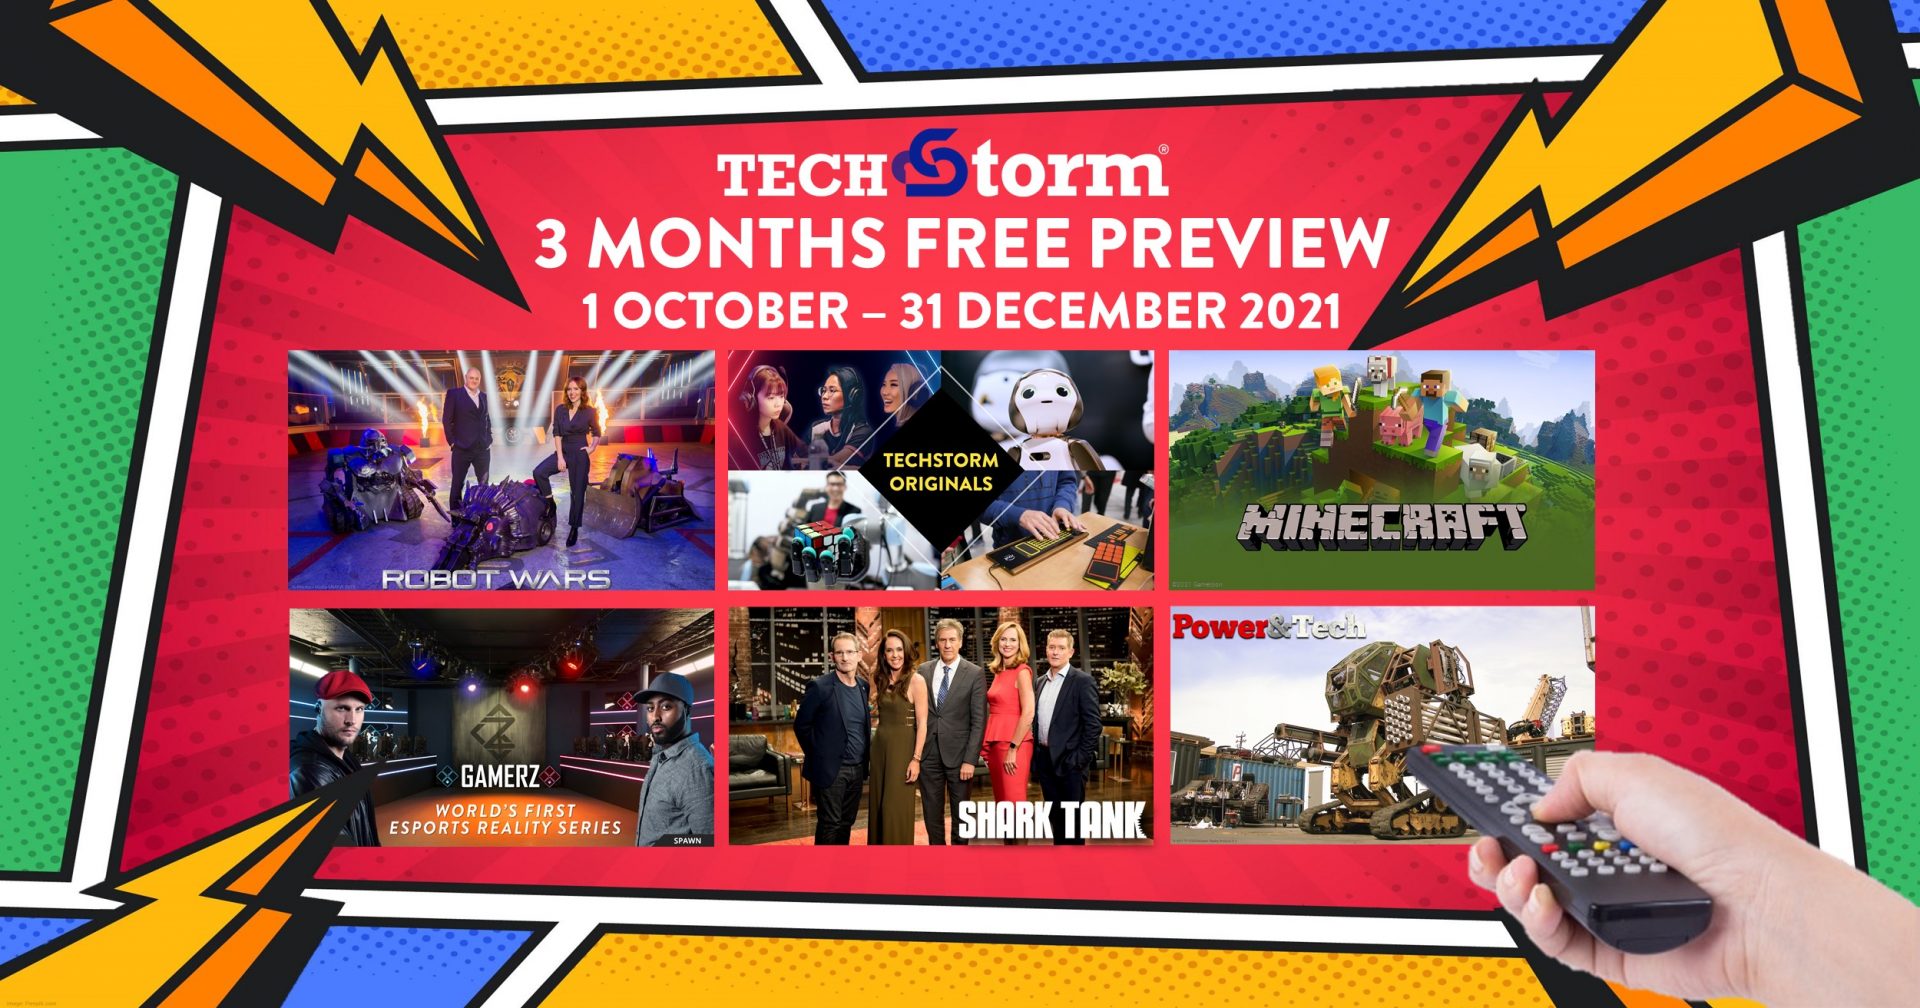 Unifi TV offers 3 Months Free Preview of TechStorm Channel from October 2021